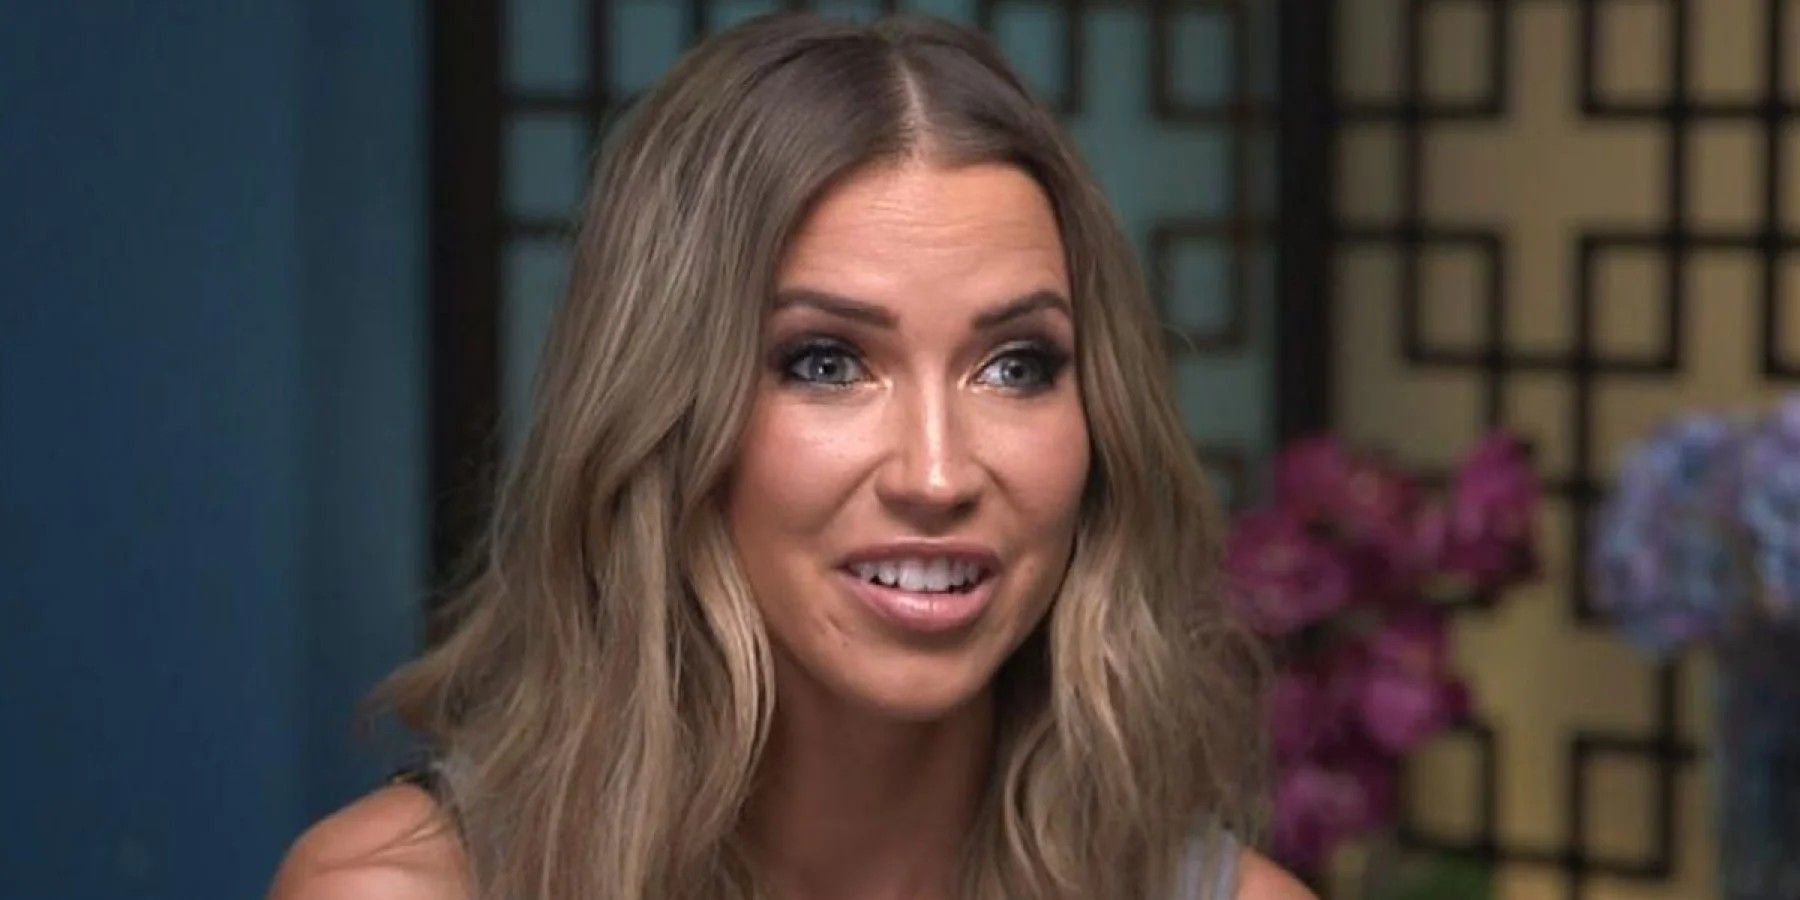 Kaitlyn Bristowe The Bachelor talking to cameras confessional